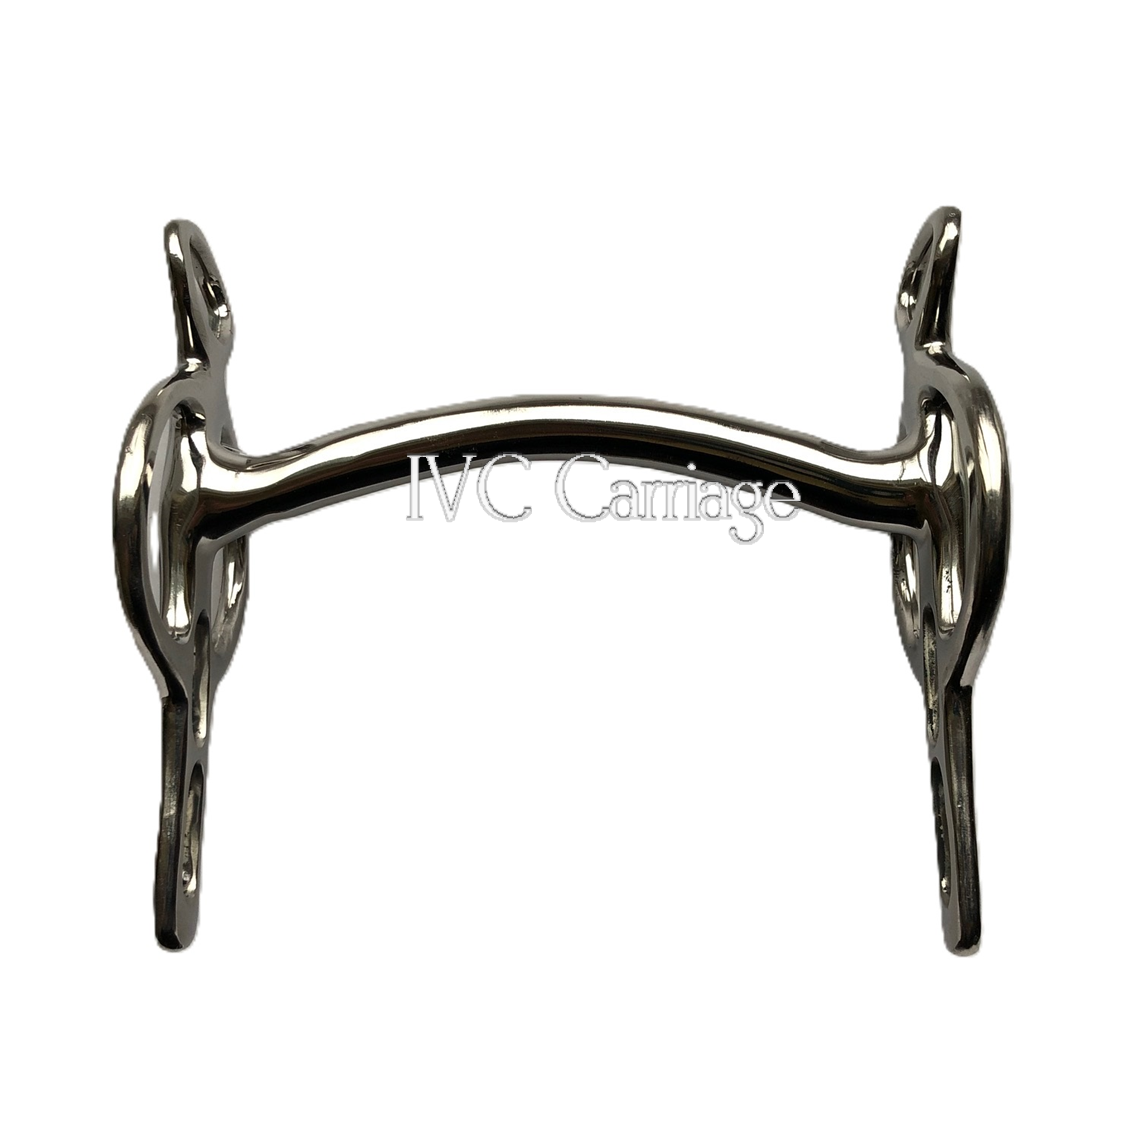 Arch Liverpool Fixed Cheek Bit | IVC Carriage